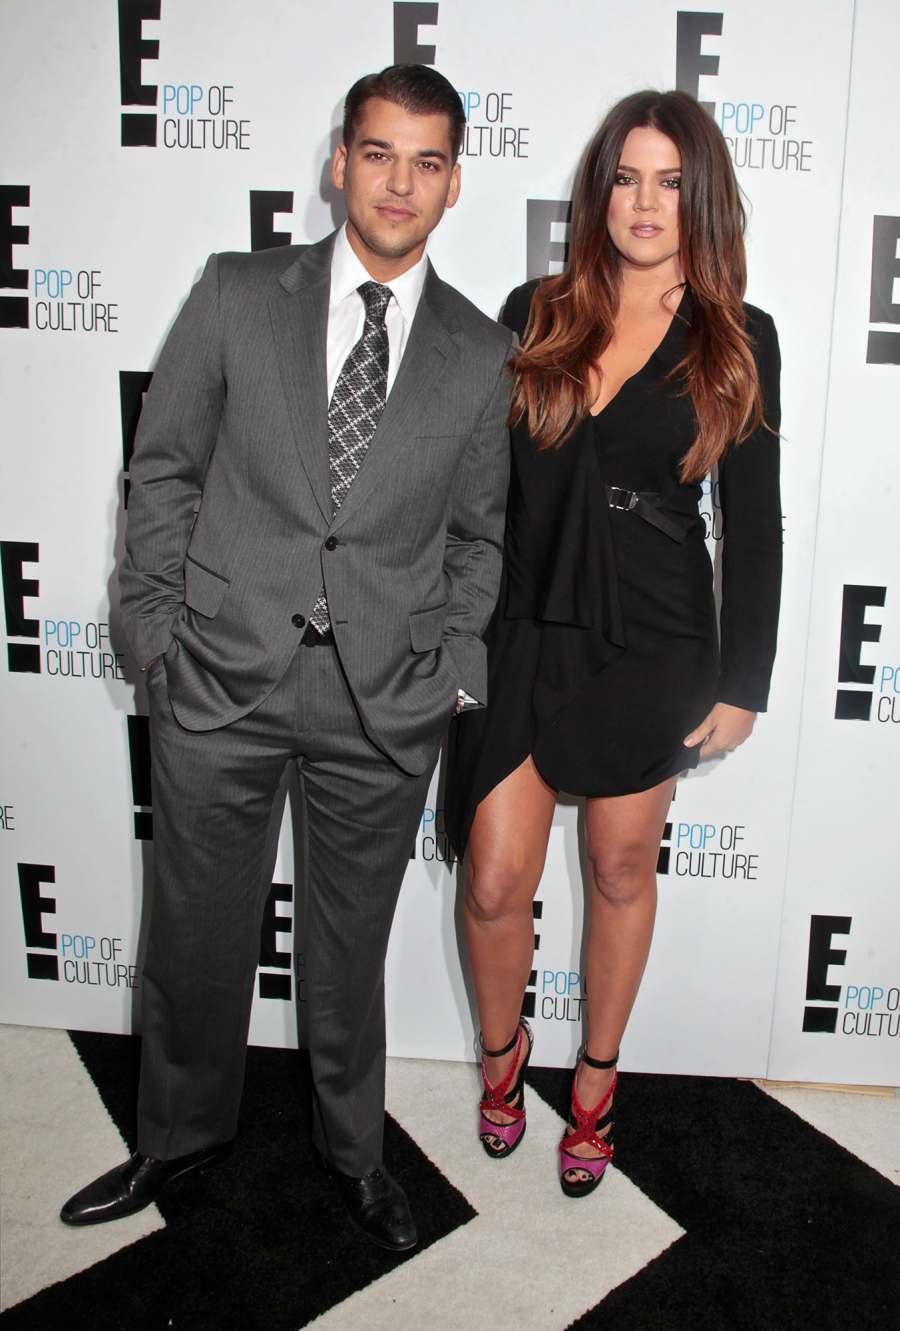 Khloe Kardashian's Sweetest Sibling Moments With Brother Rob Kardashian Over the Years2012 E! Upfront, New York, America - 30 Apr 2012